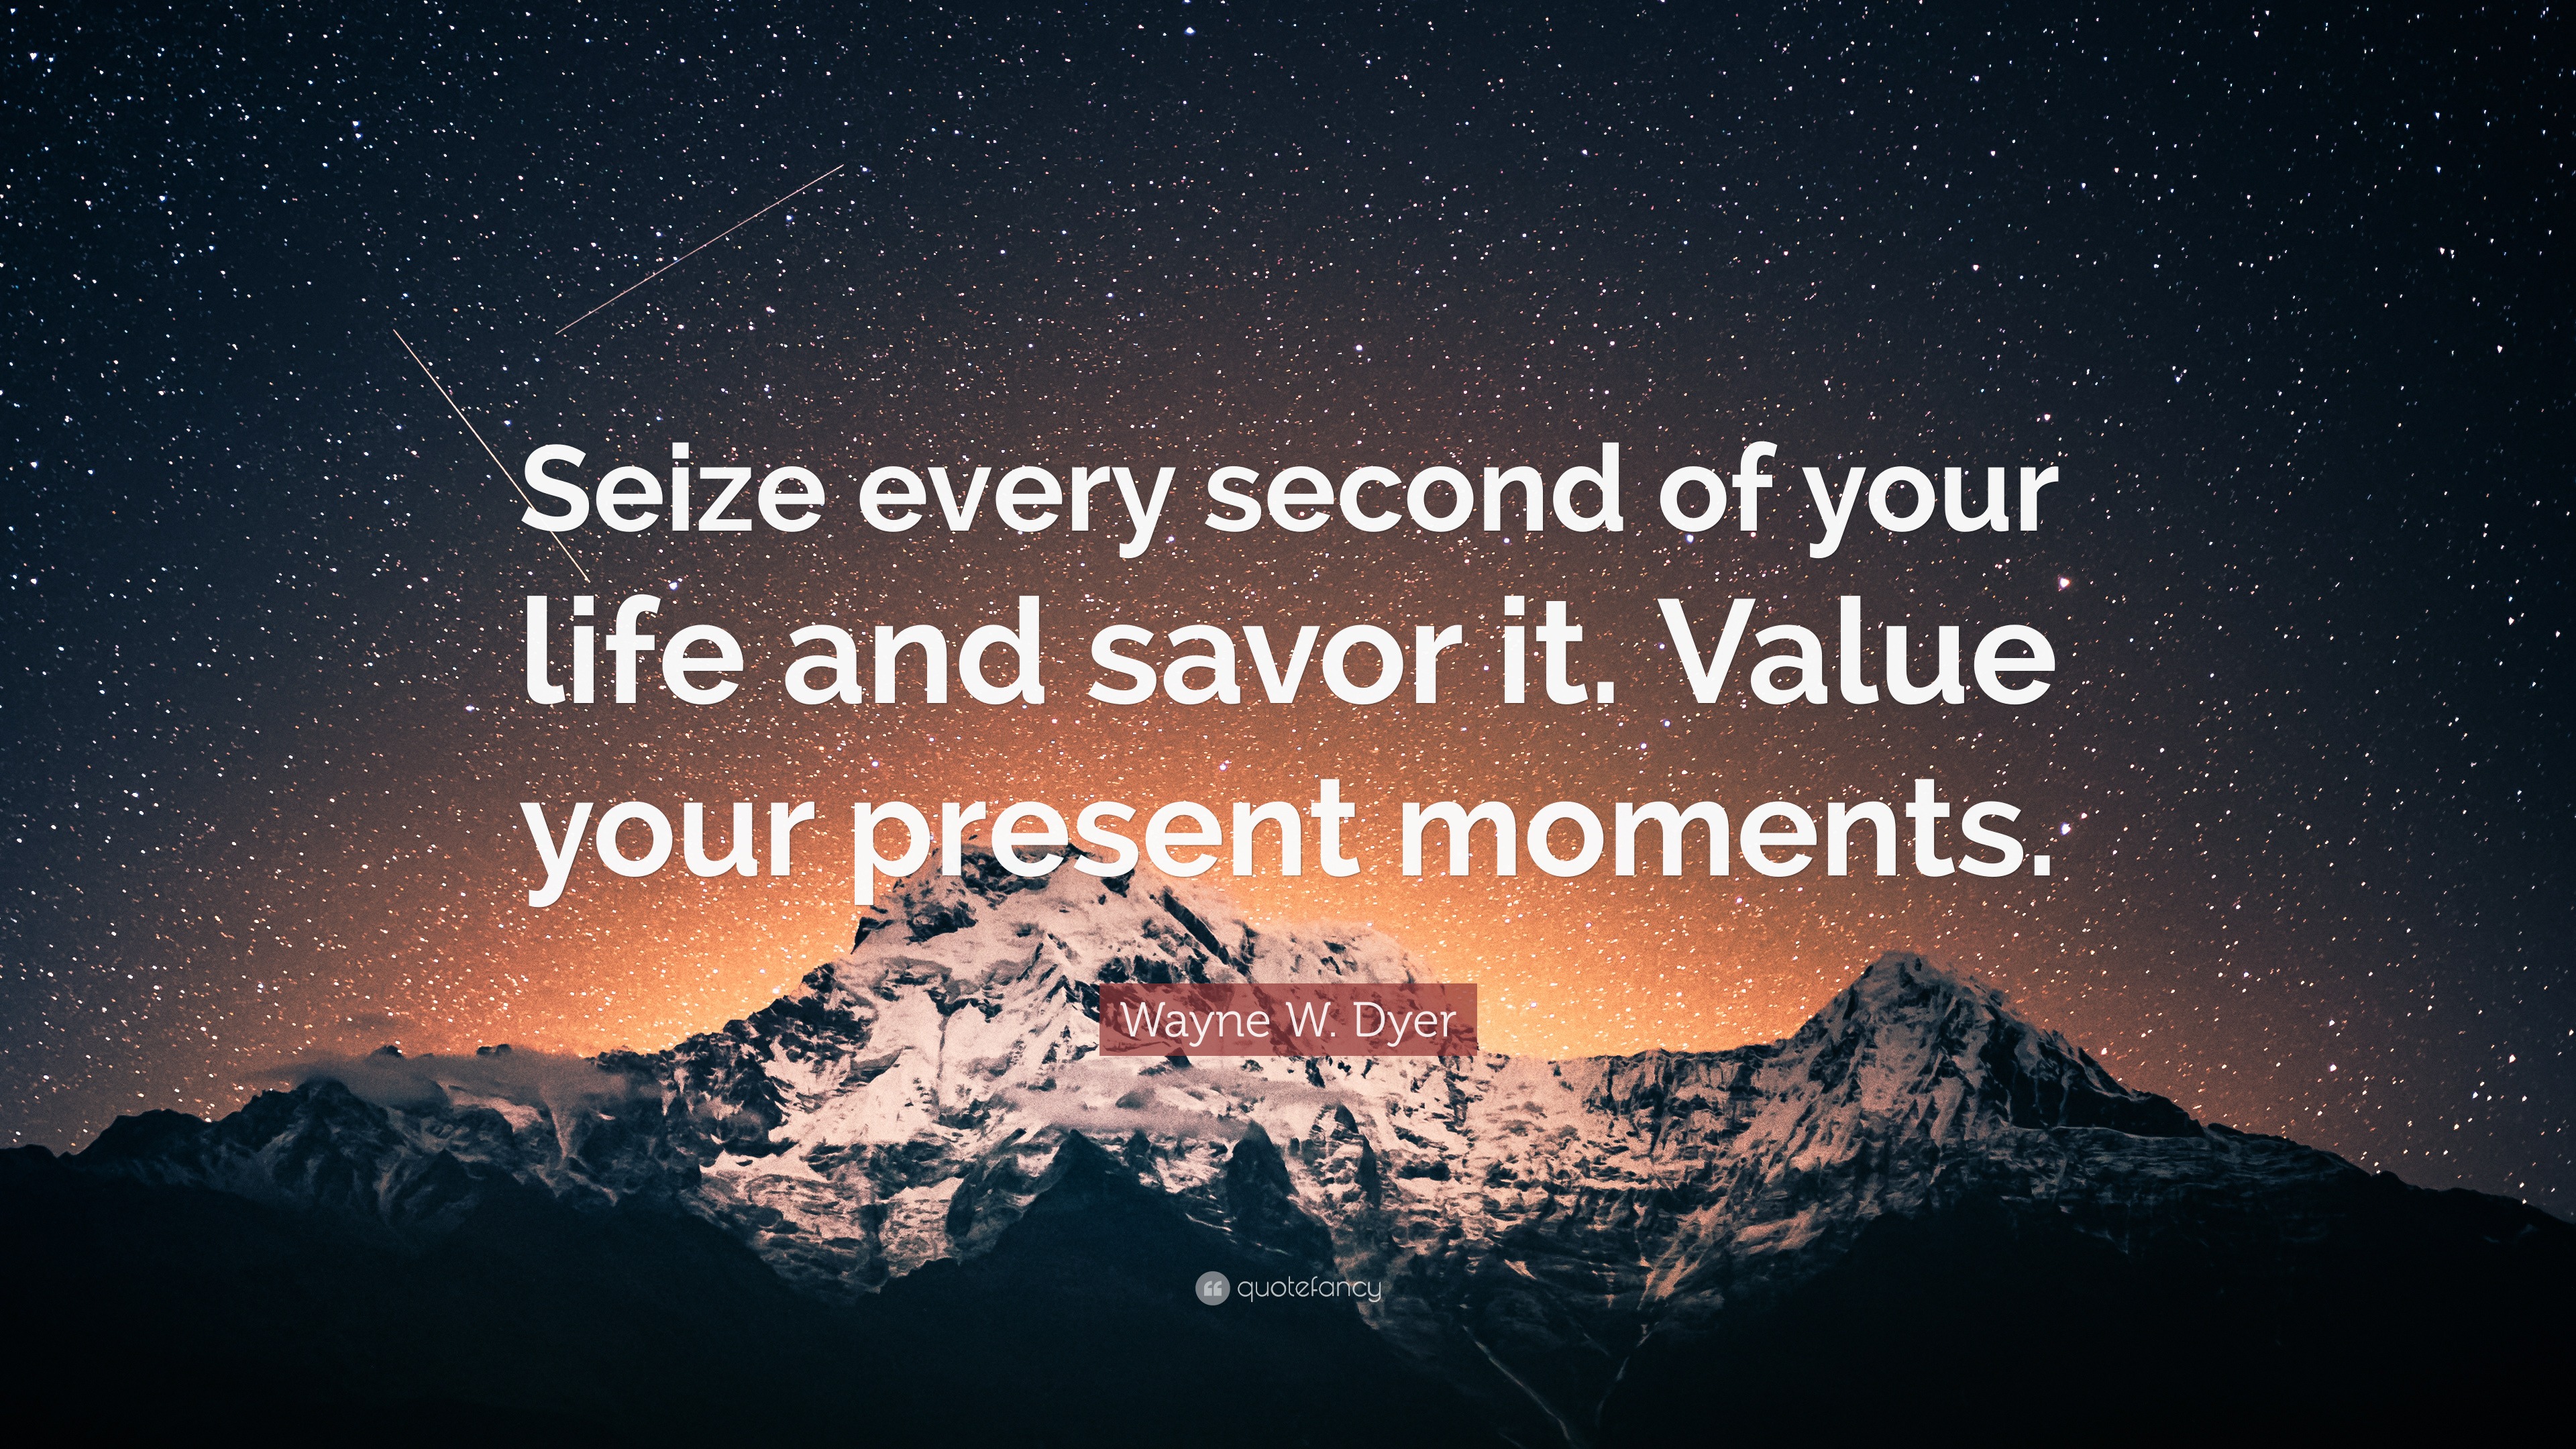 Wayne W. Dyer Quote: “Seize every second of your life and savor it